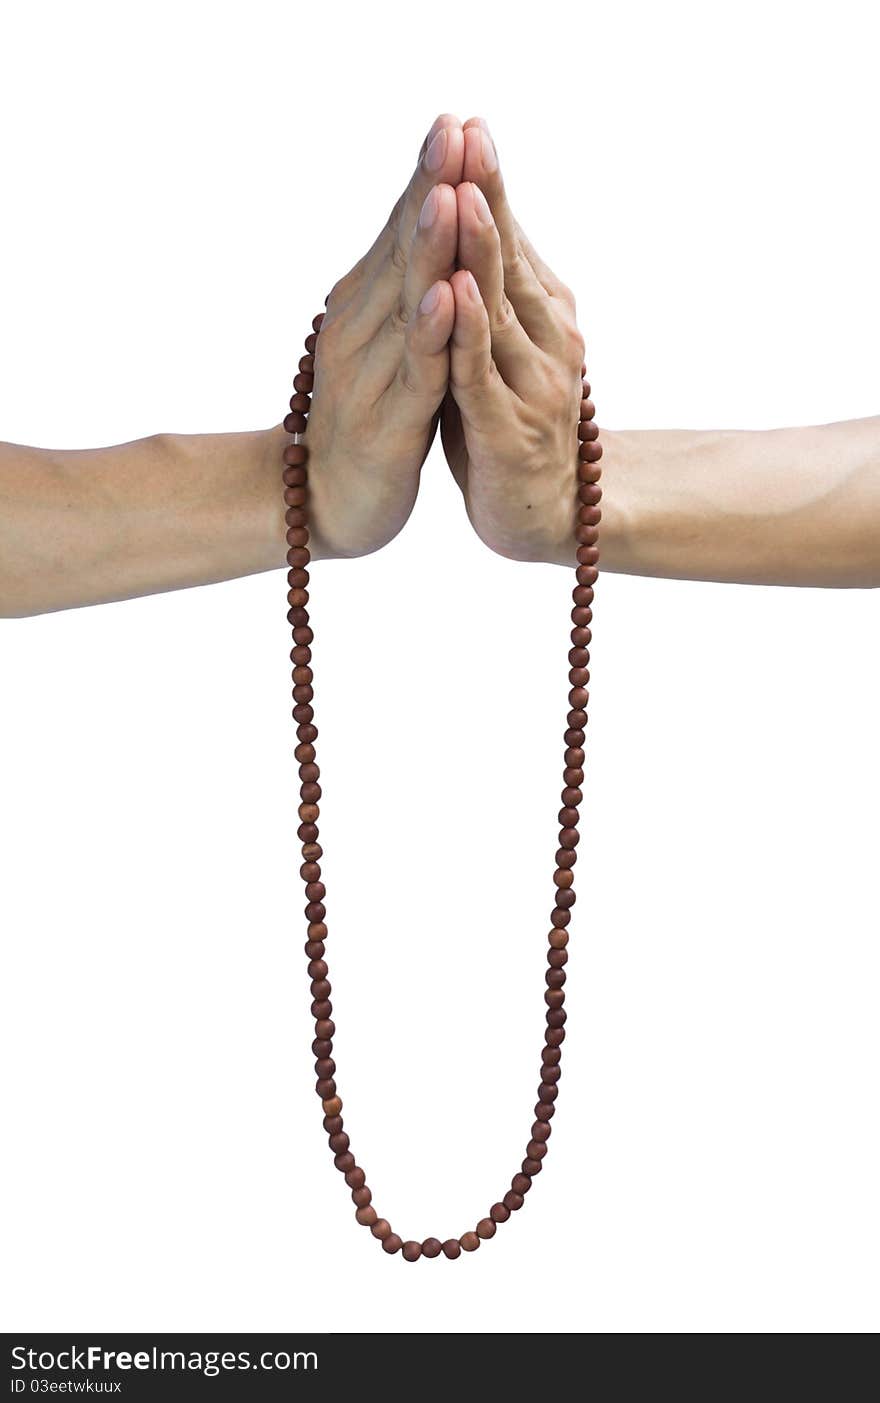 Hands holding beads necklace for prayer